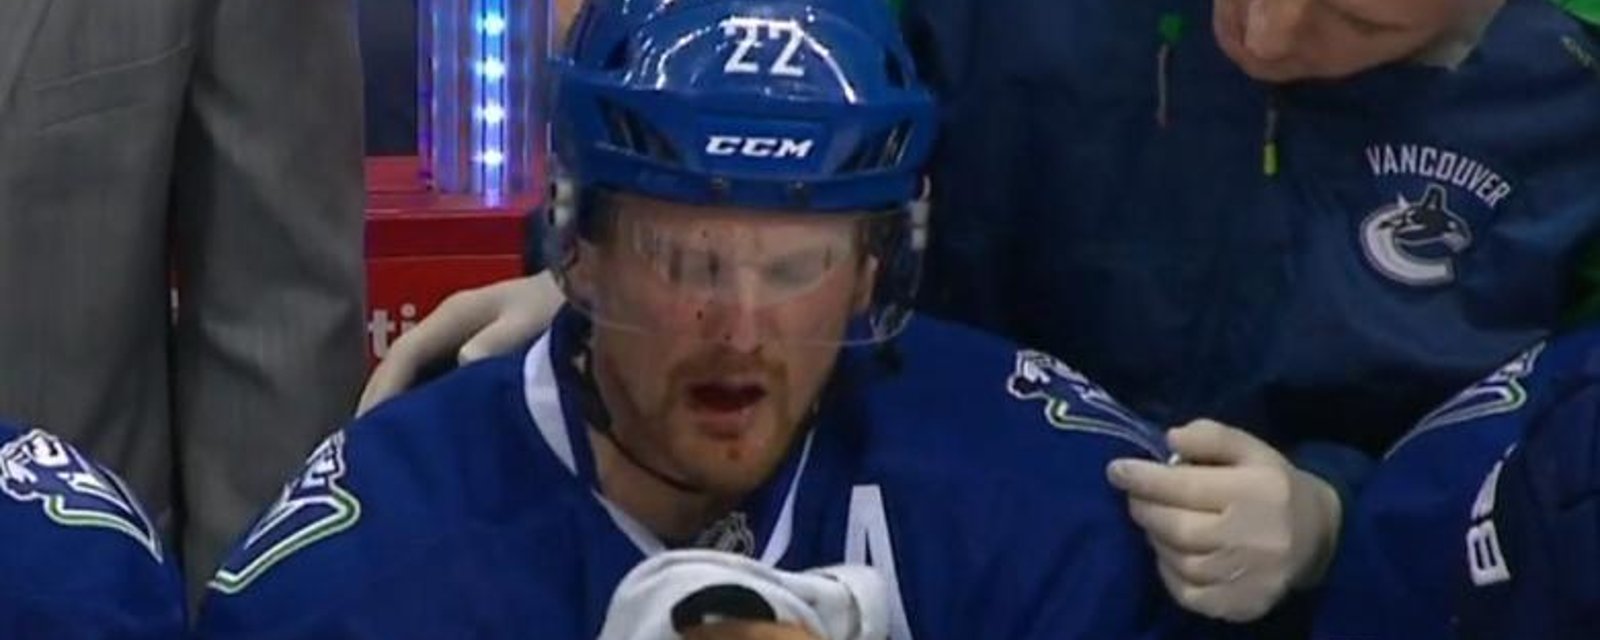 Fluke accident results in Daniel Sedin taking a puck to the mouth.